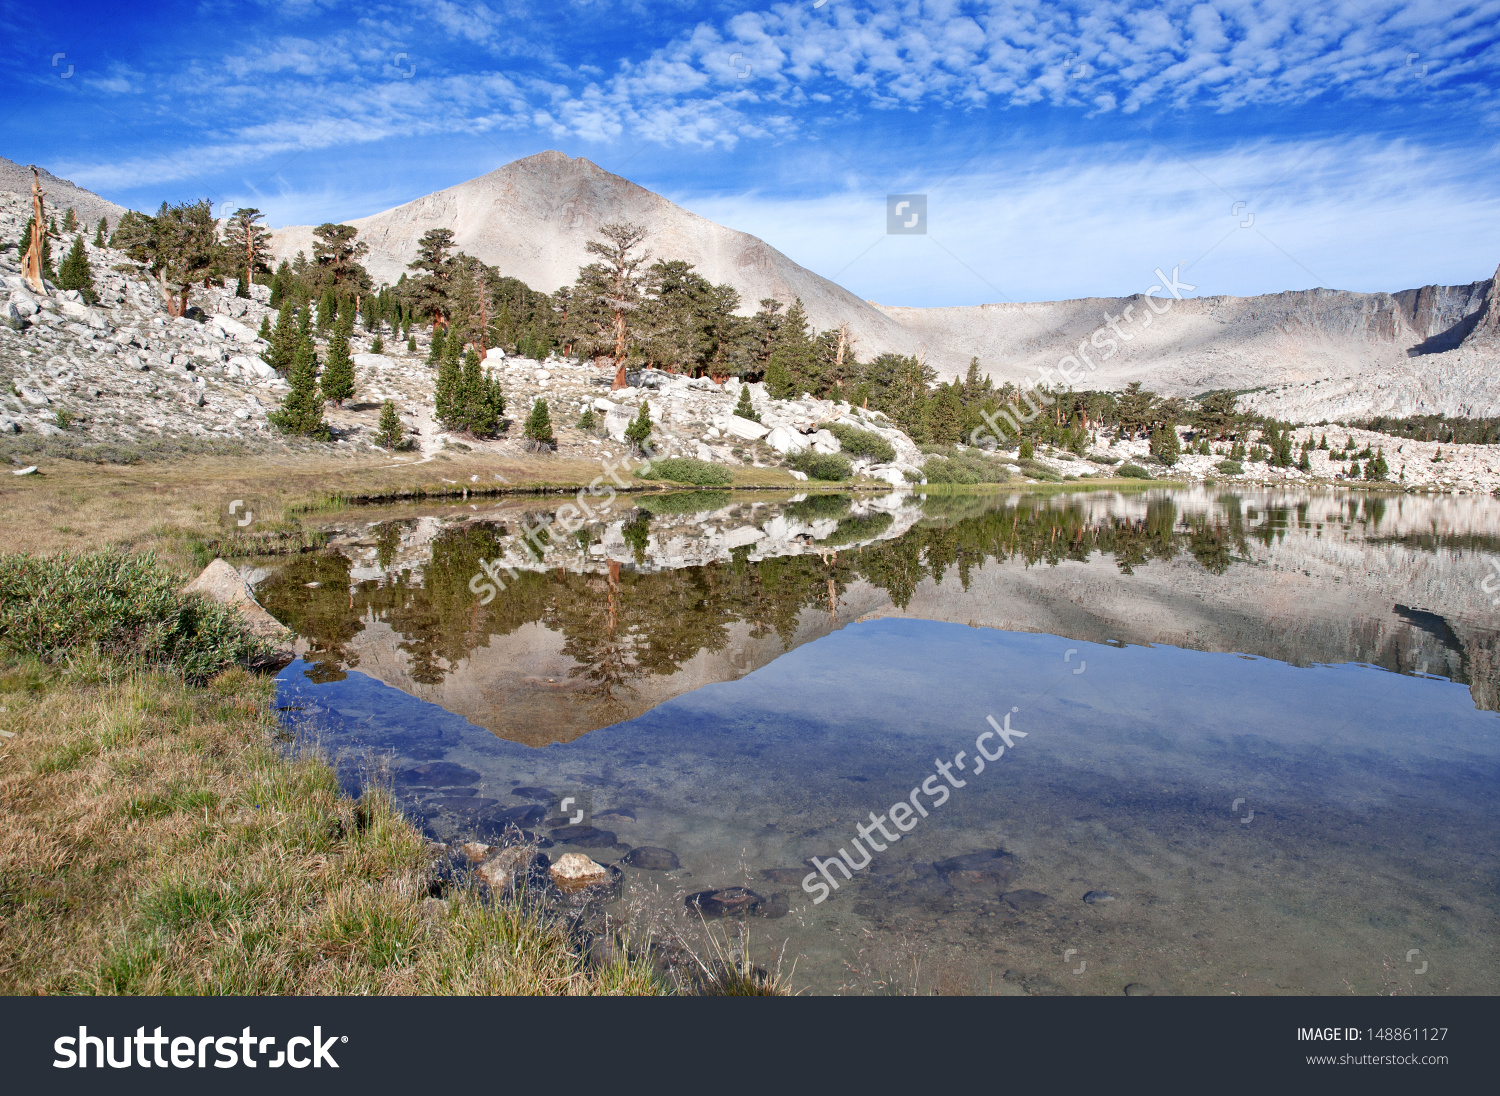 Sierra Nevada Mountains clipart #16, Download drawings